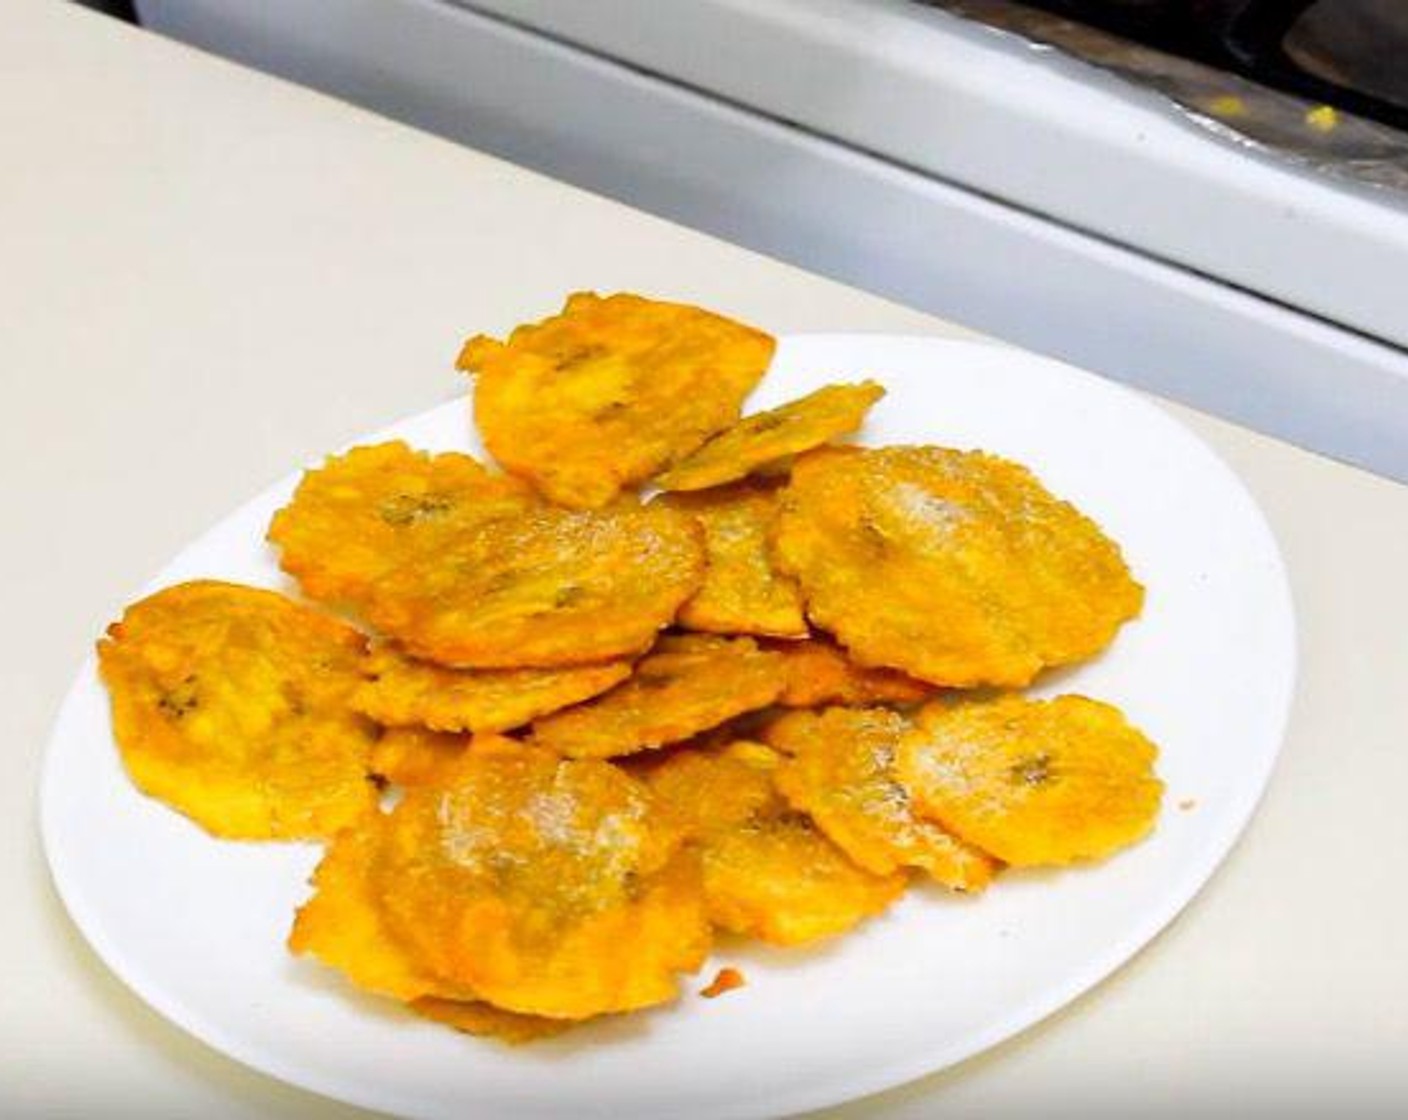 step 5 Transfer finished plantain slices to a serving platter and sprinkle with Salt (to taste) and Ground Black Pepper (to taste). Serve immediately and enjoy!